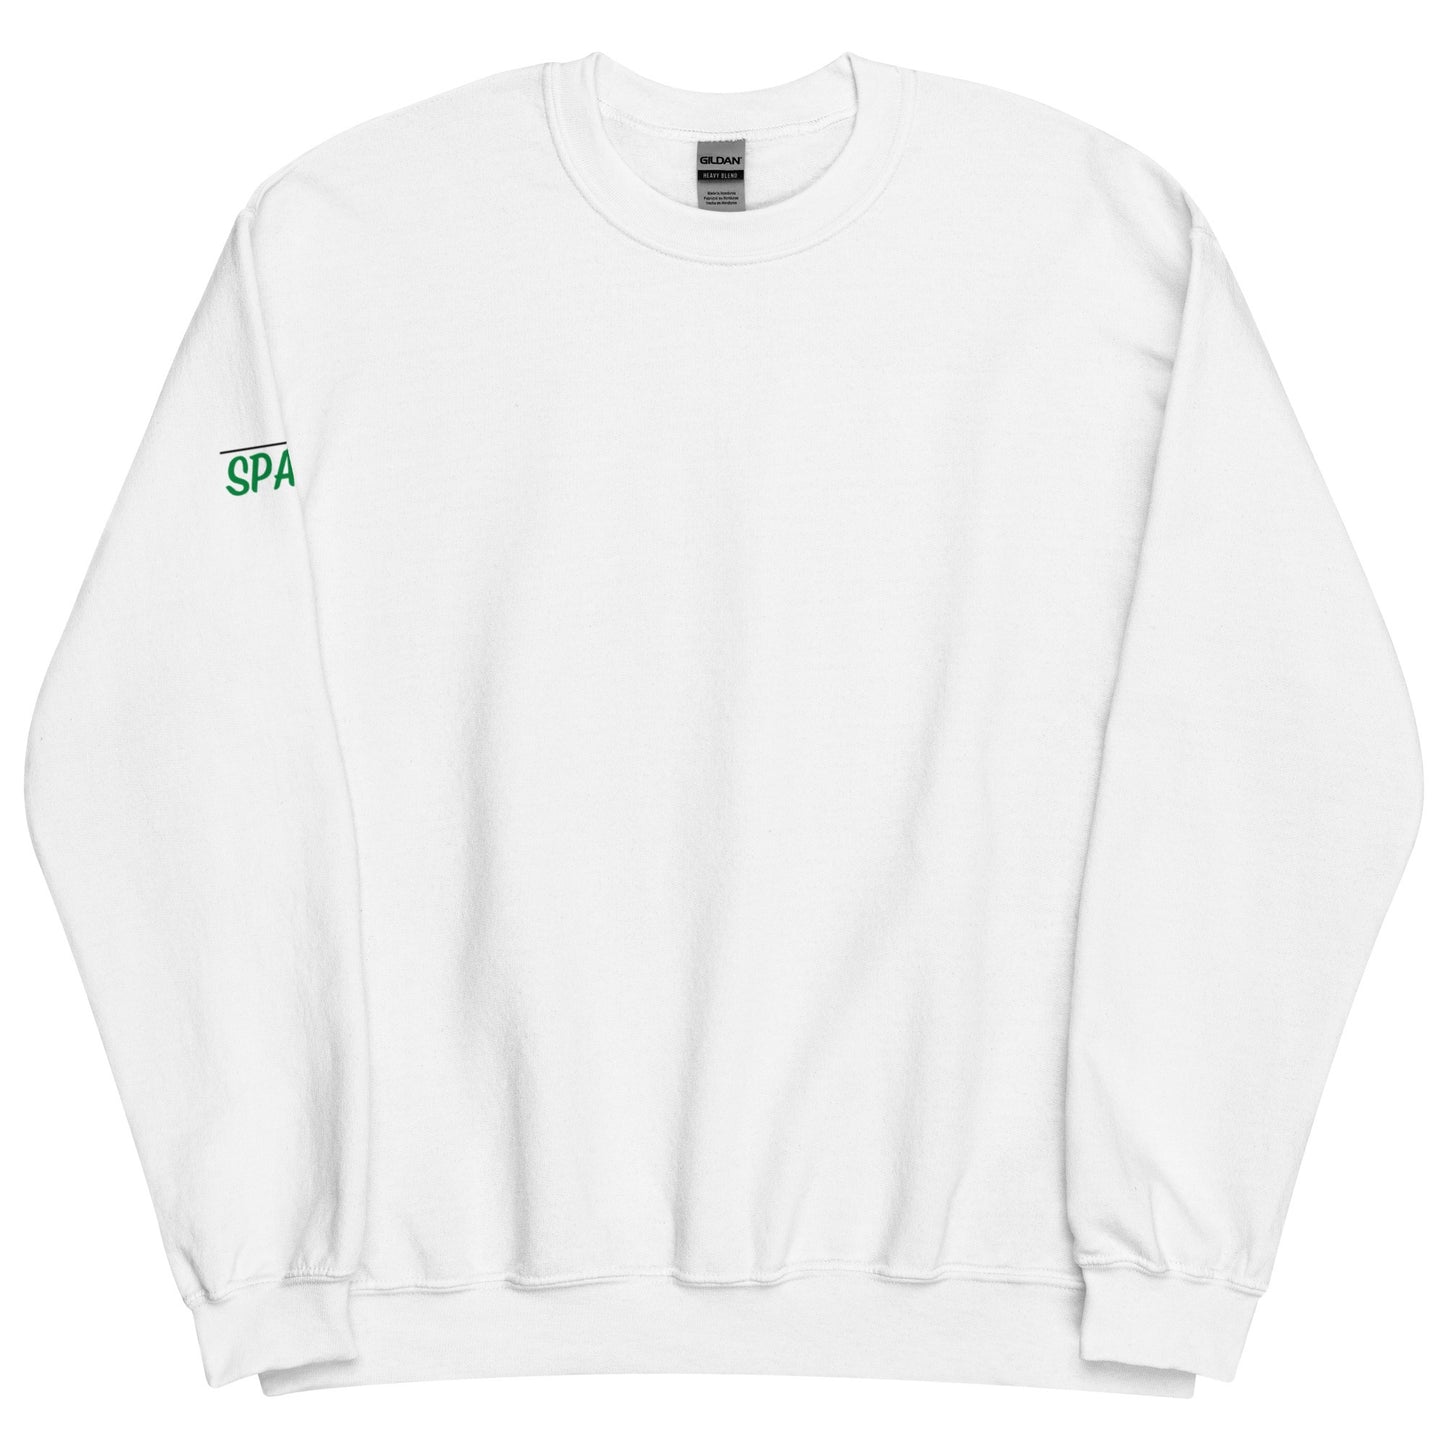 SPA - Monitor "Keep Yourself In Check" Crewneck - SPA Merchandise 